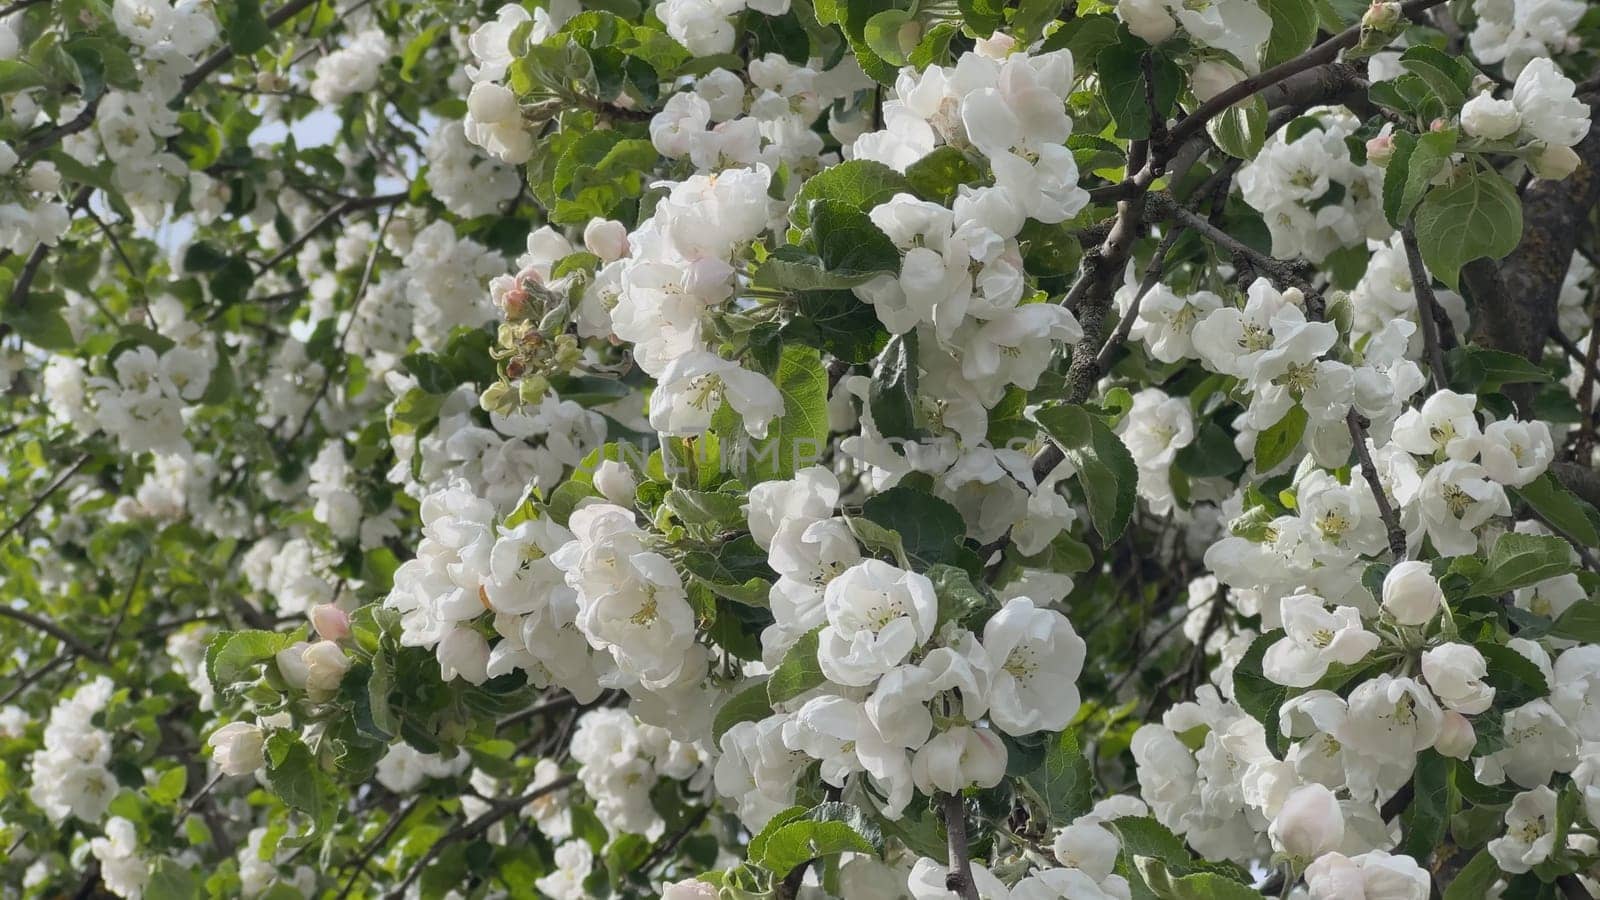 Apple blossom flowers on a tree in spring